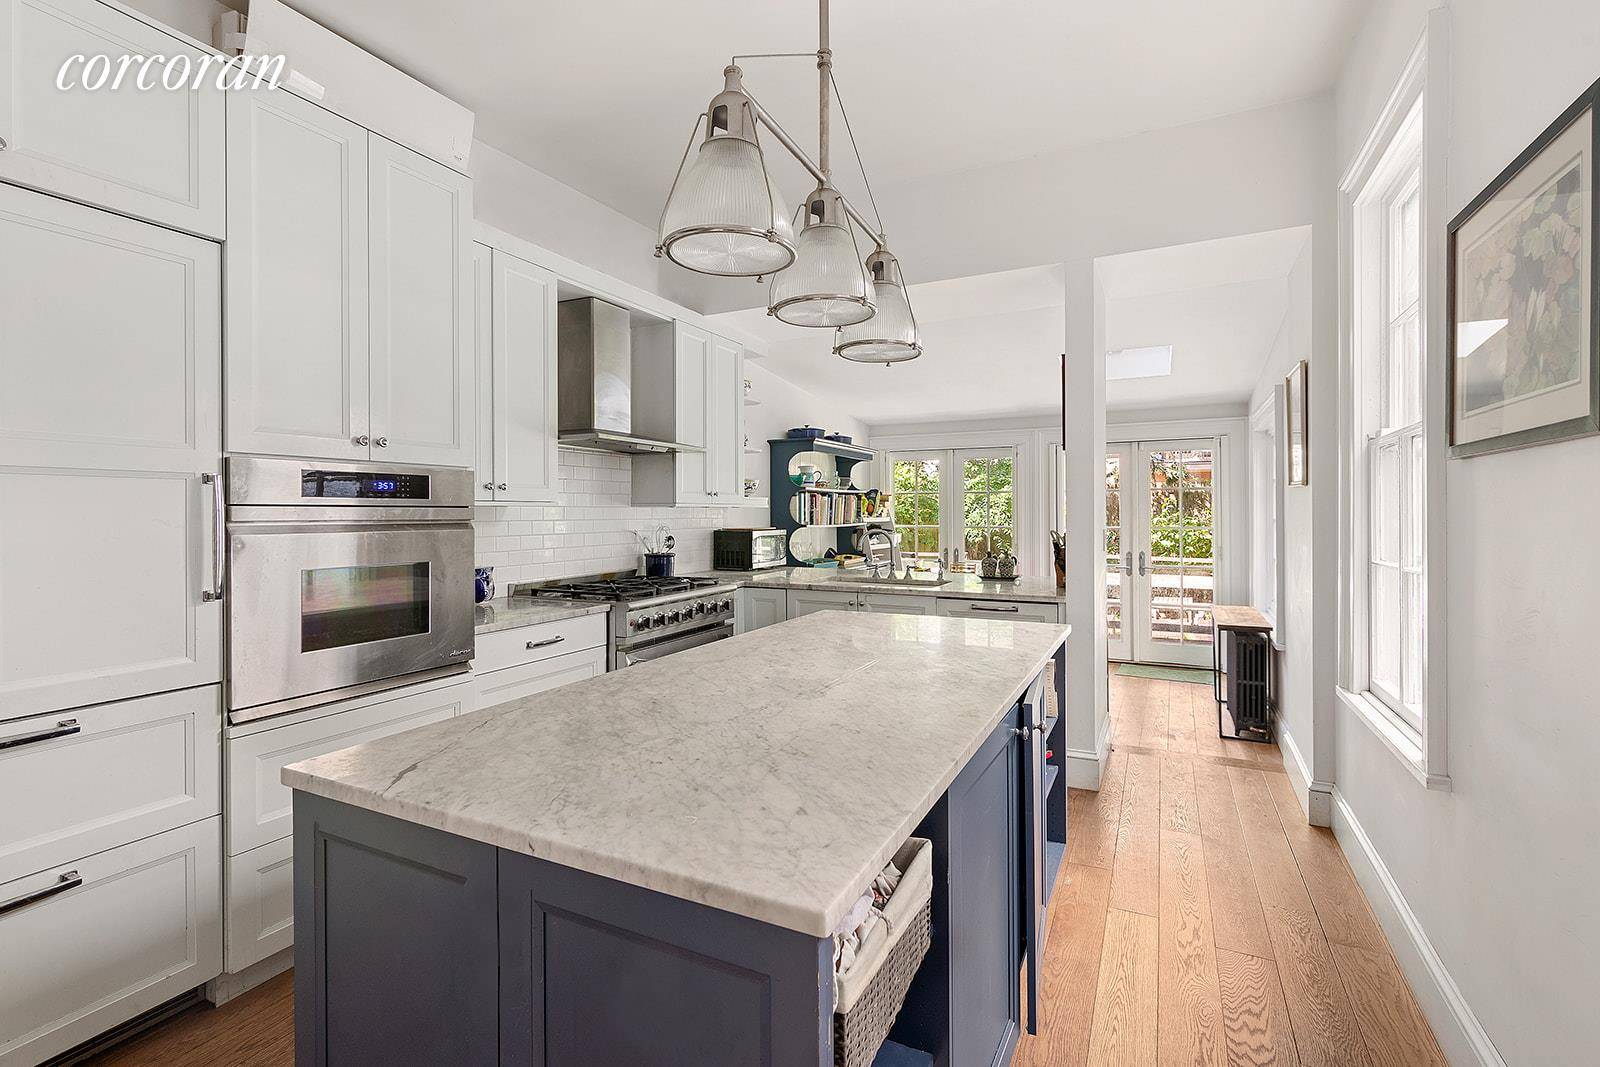 Modern Farmhouse in Park Slope available for rent furnished or unfurnished.